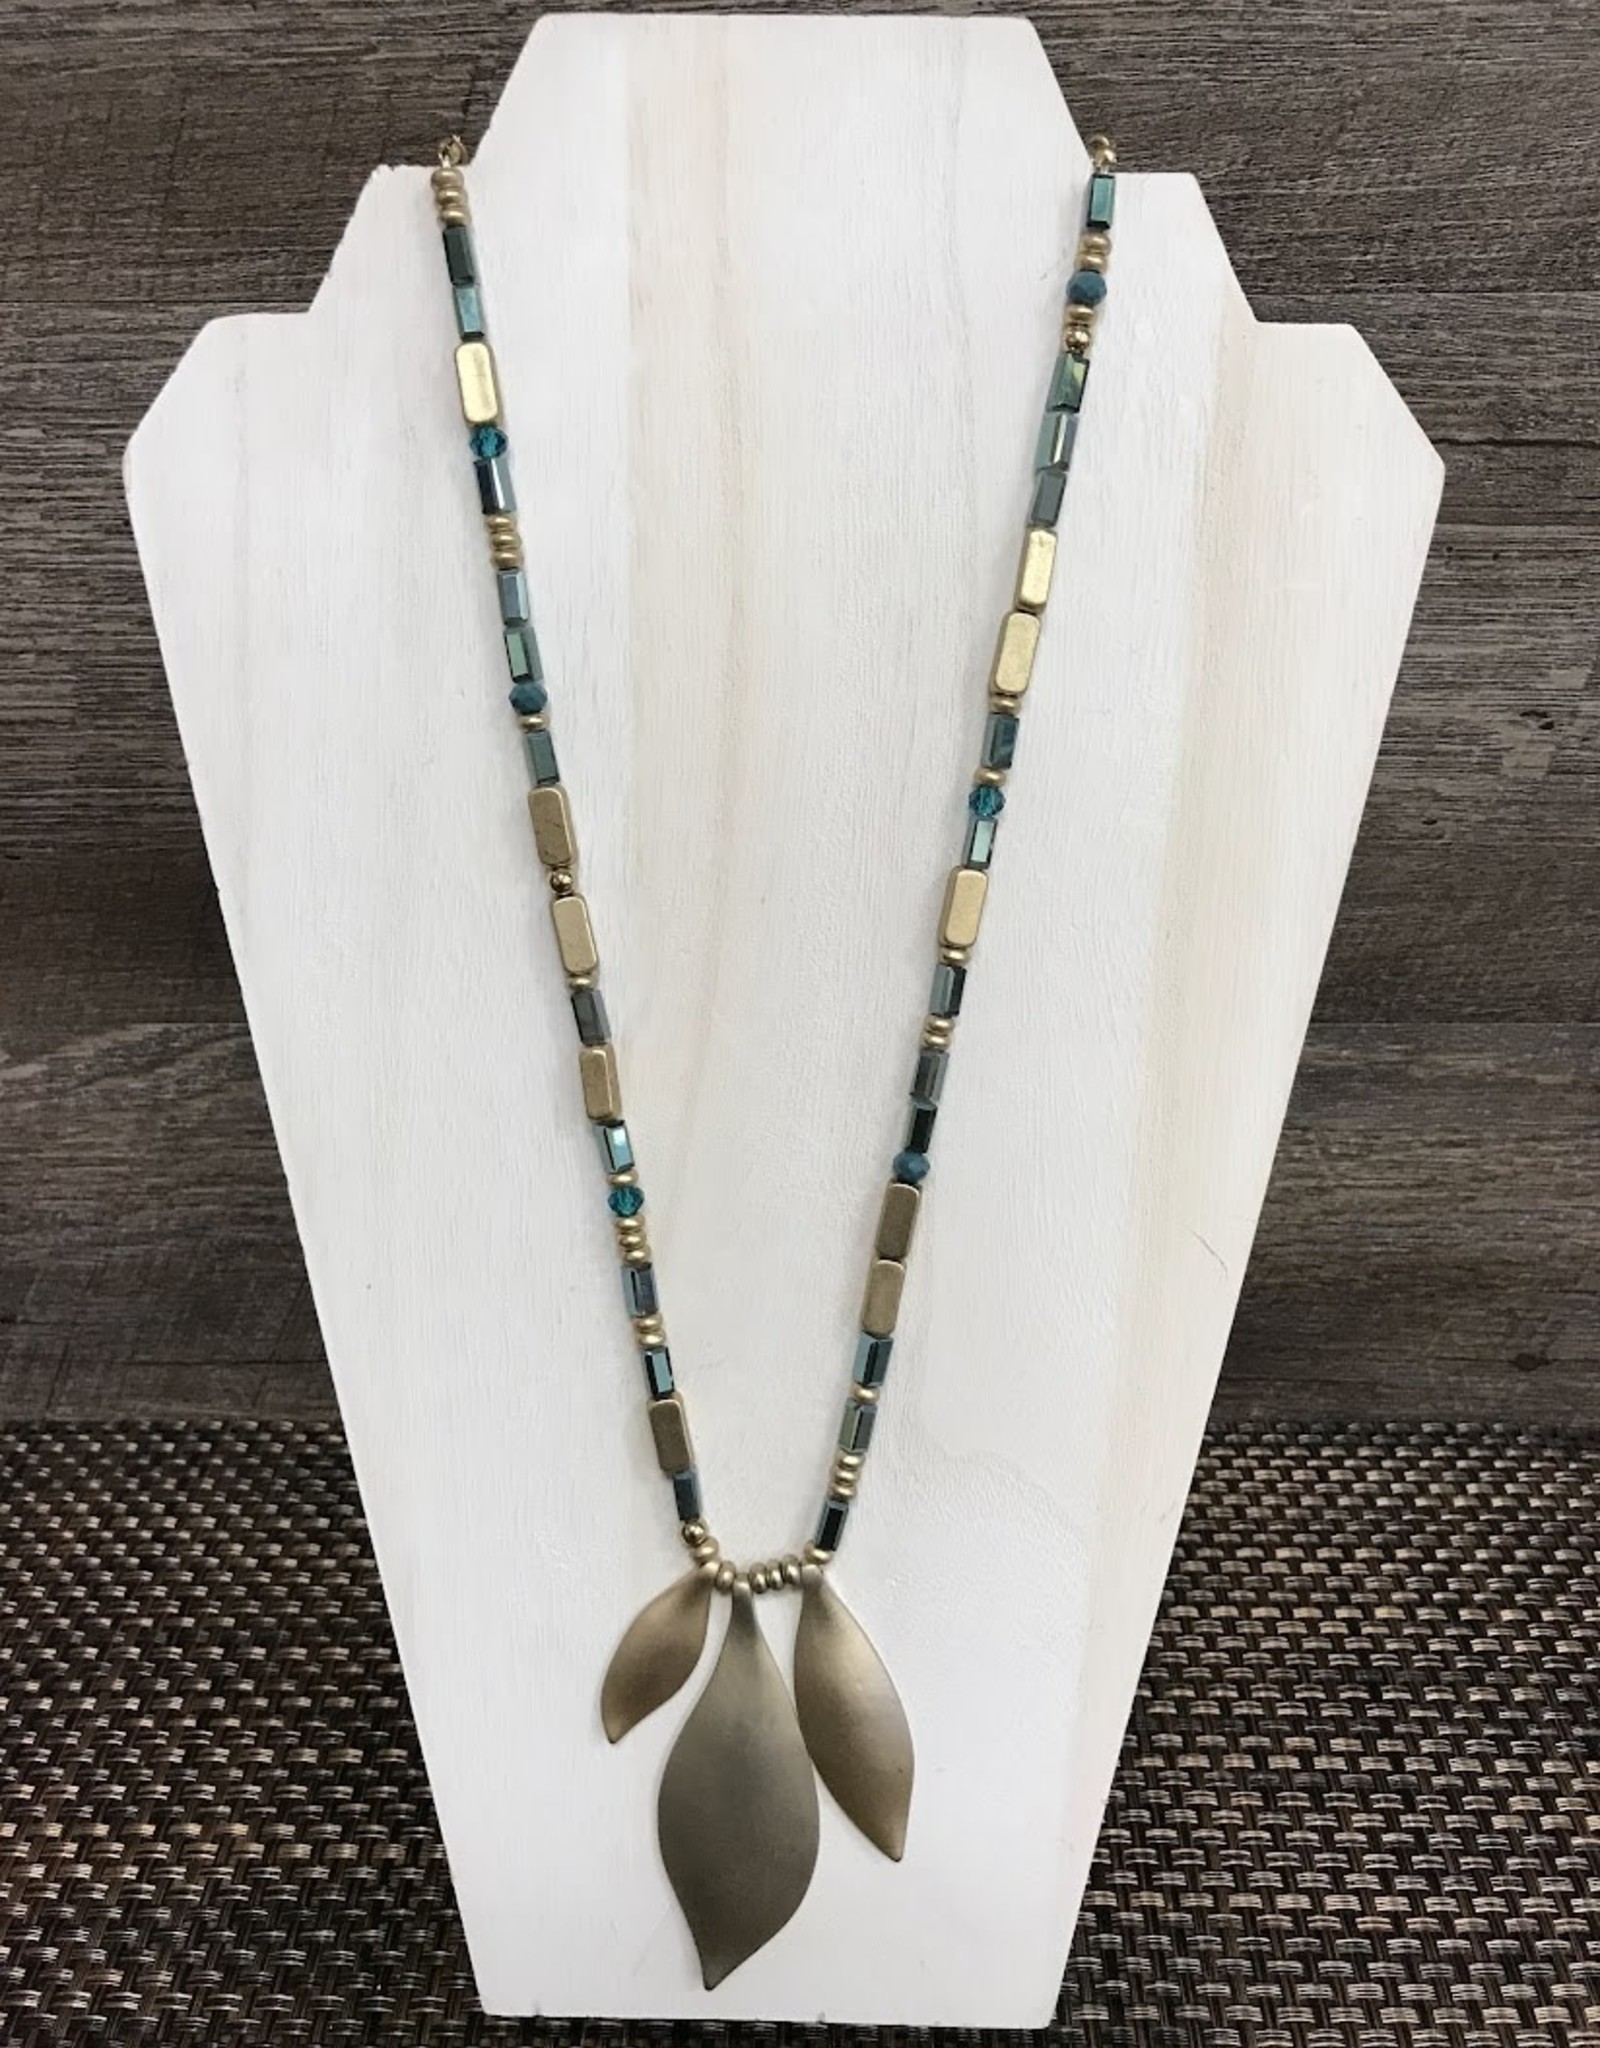 - Gold Teal Beaded w/Shaped Pendants Long Necklace